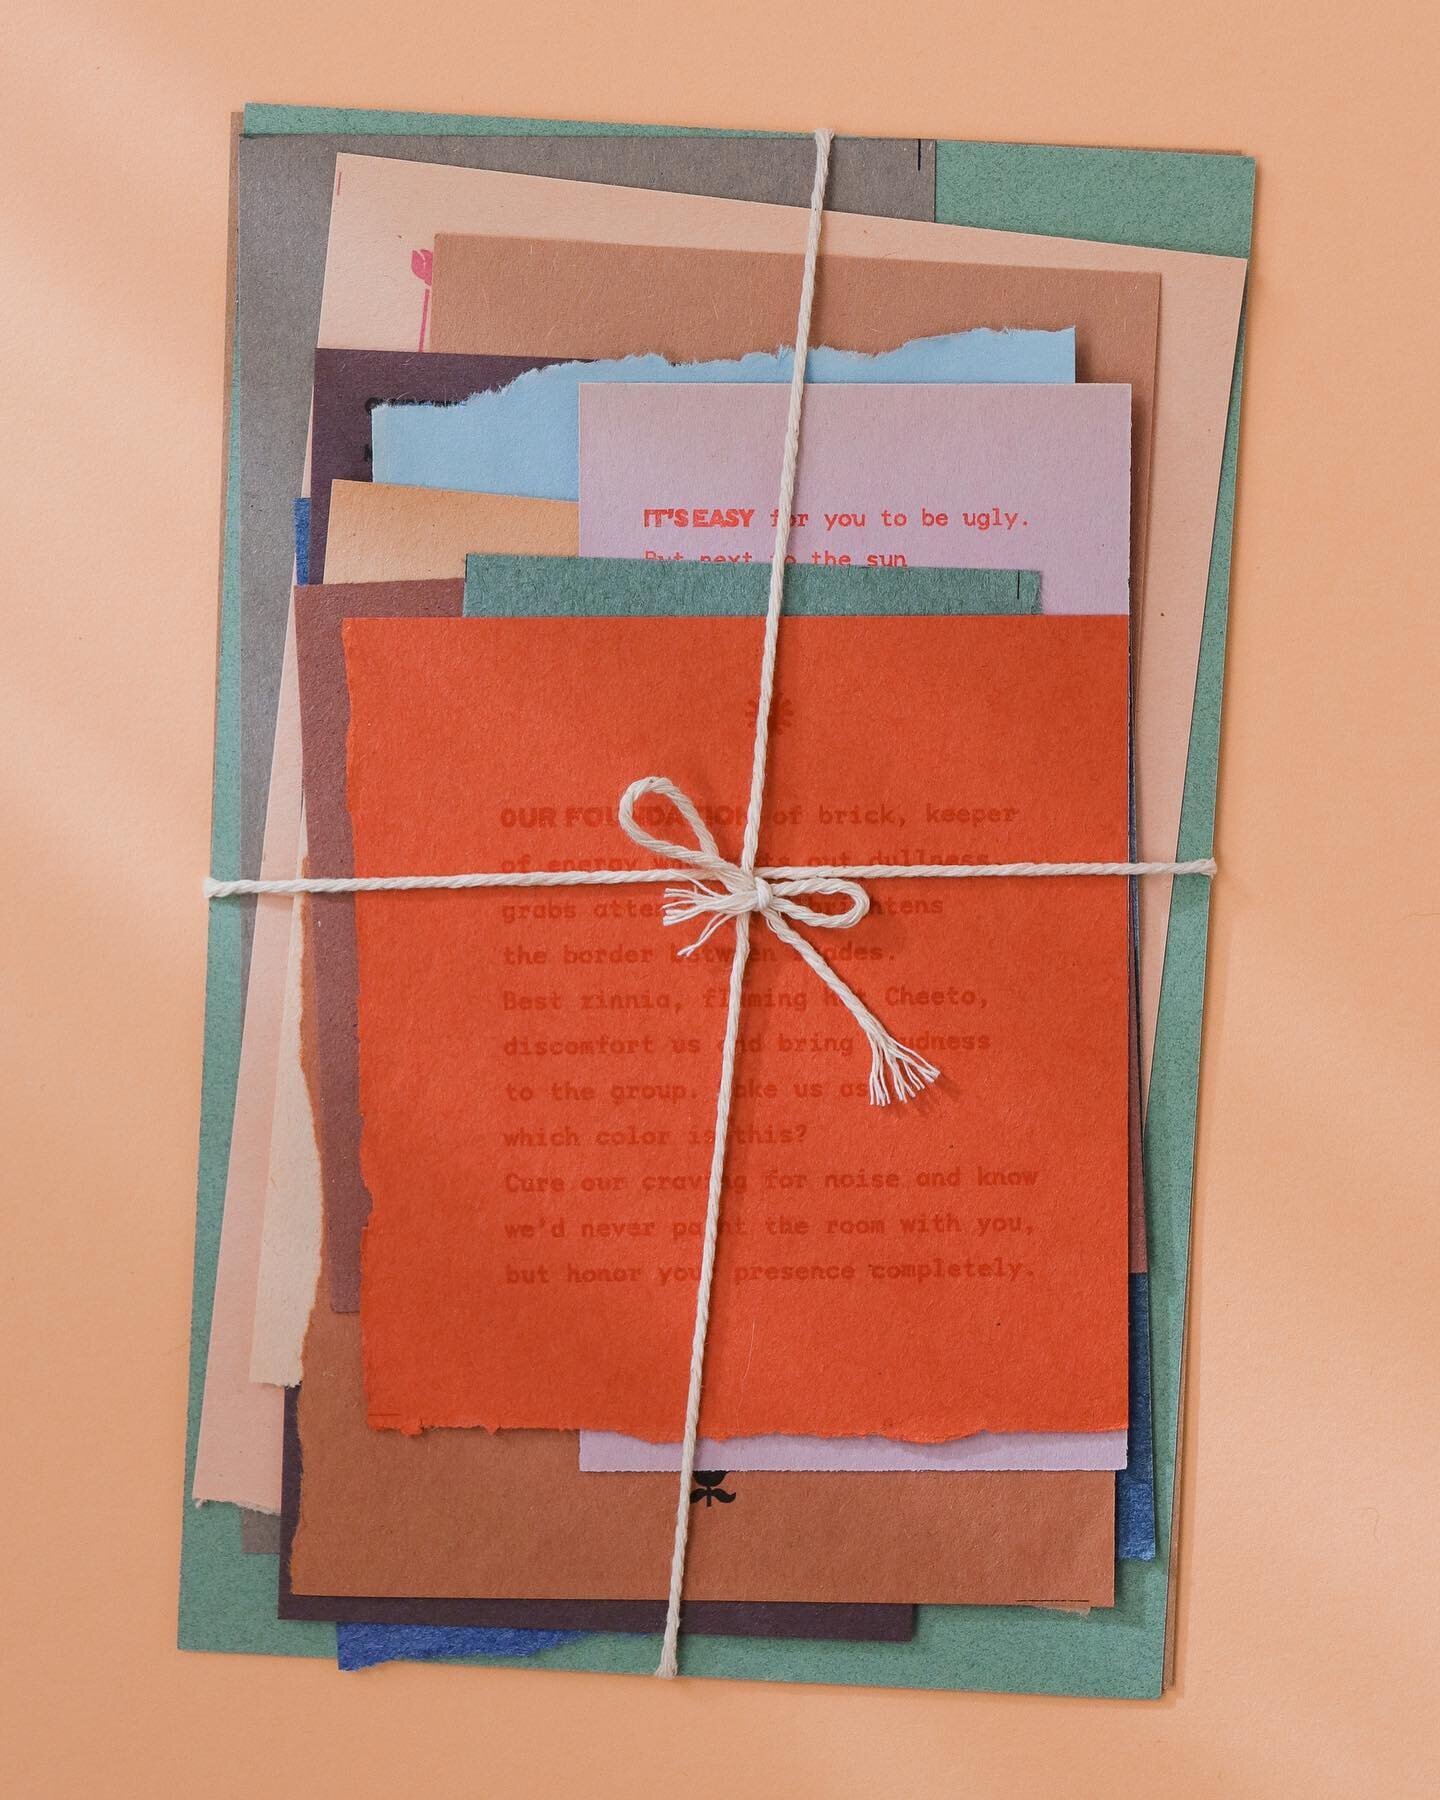 Introducing latest project: Compendium of Color
A collaboration with poet @jsuskin !

It is a loose book form inspired by my vintage paper collection, mainly acquired at @artsandscraps. We blended my vision of color and Jacqueline&rsquo;s language of